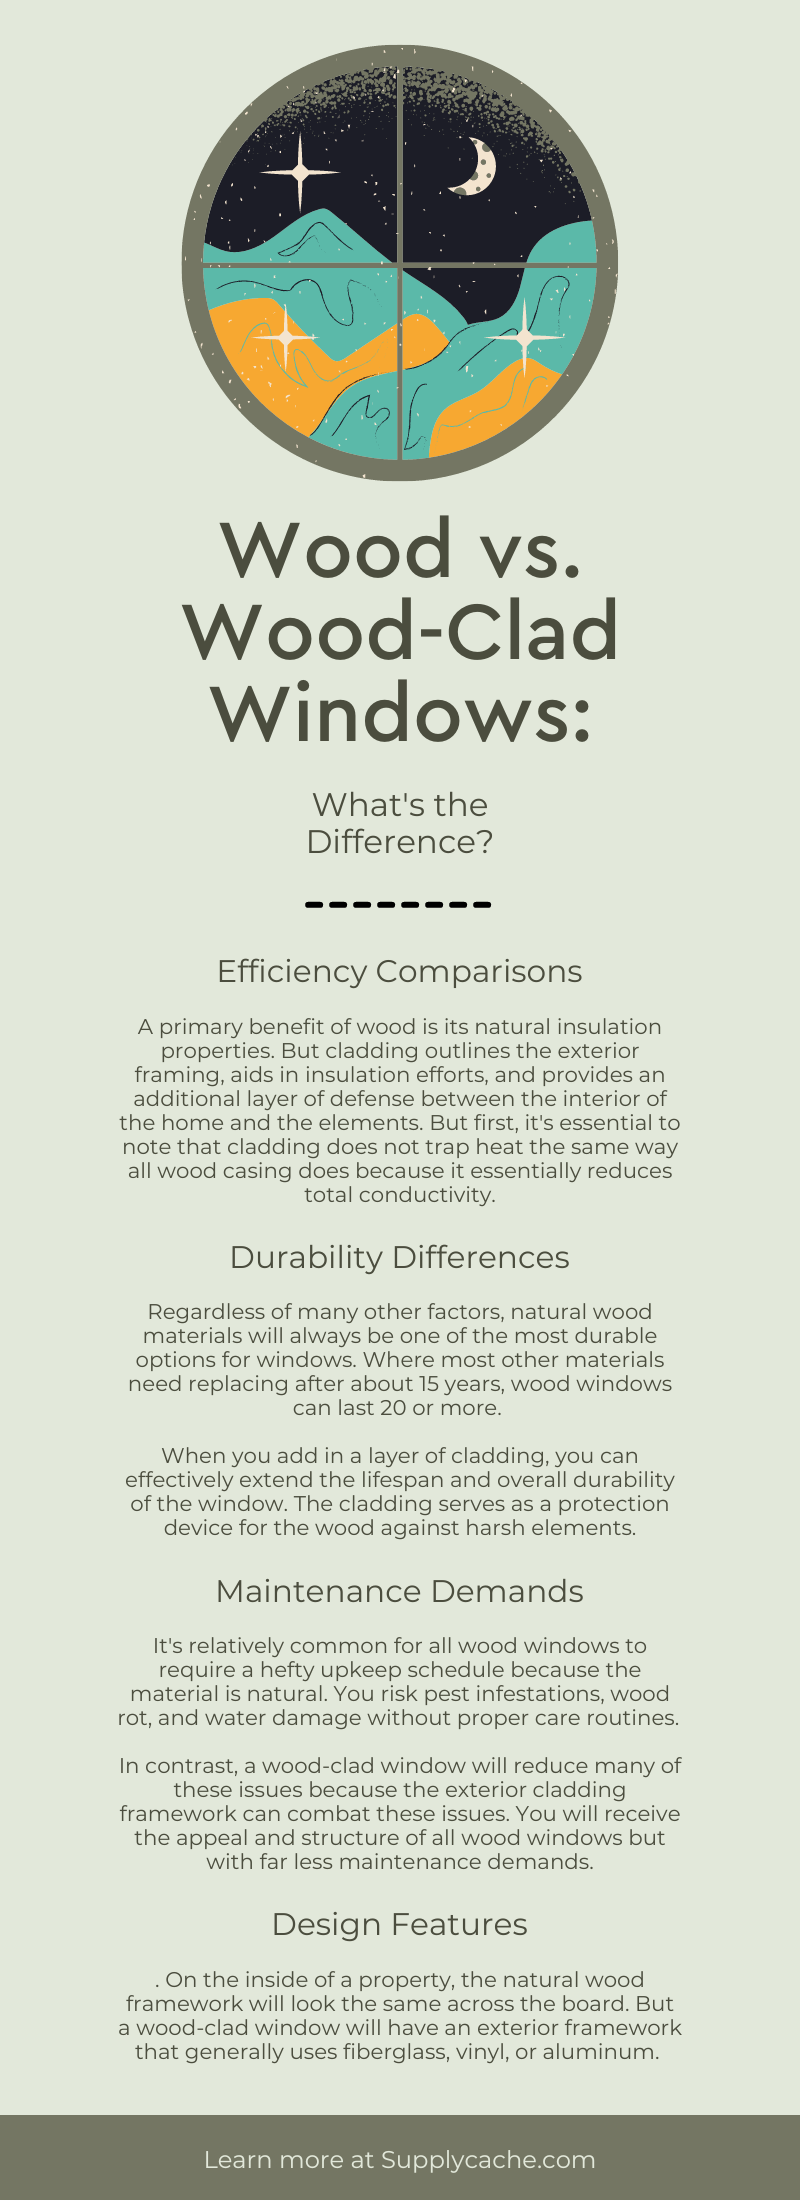 Wood vs. Wood-Clad Windows: What's the Difference?